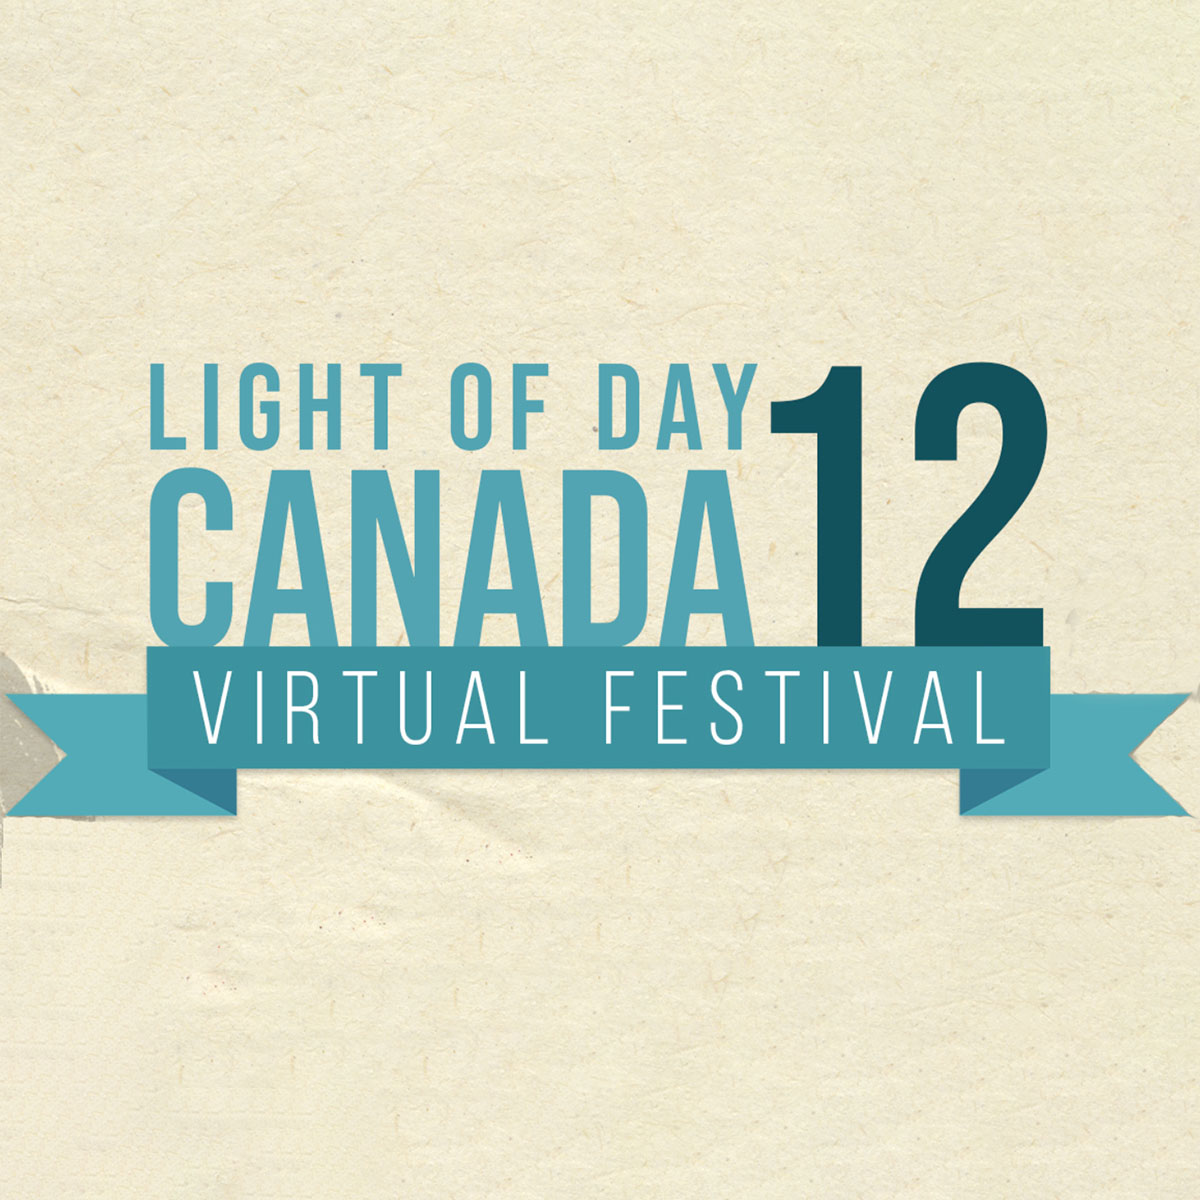 12th Annual Light of Day Canada Festival Goes Online — February 19 & 20 featuring Tom Morello, Steve Earle, Jake Clemons + more